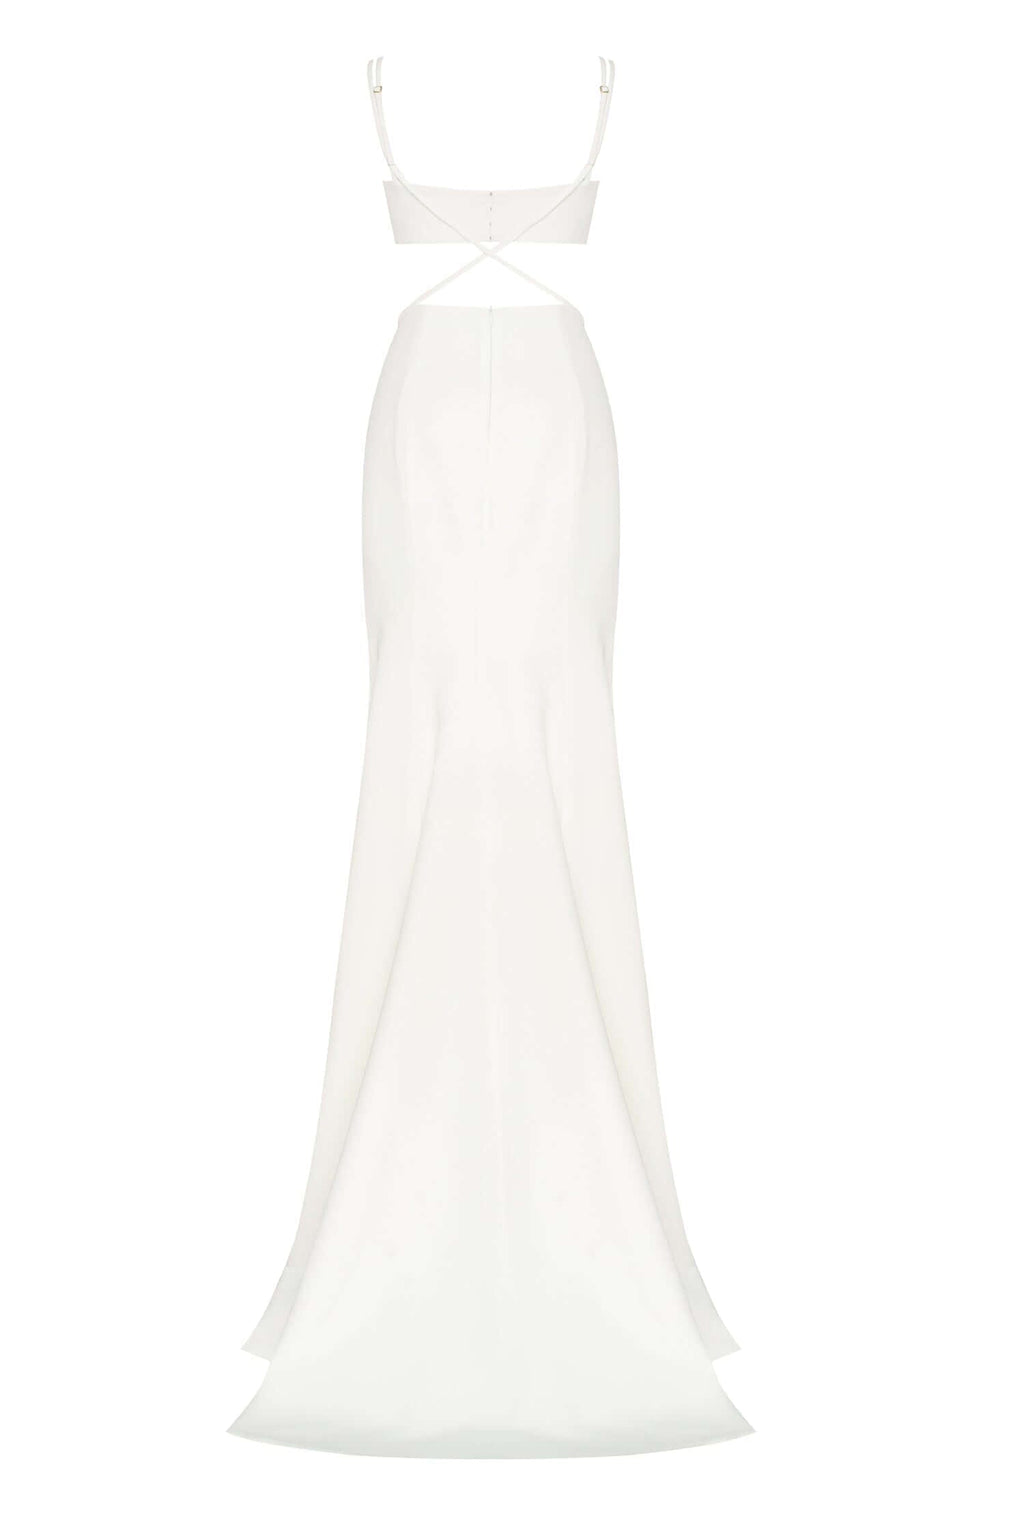 White Casual side cut out maxi dress - Milla